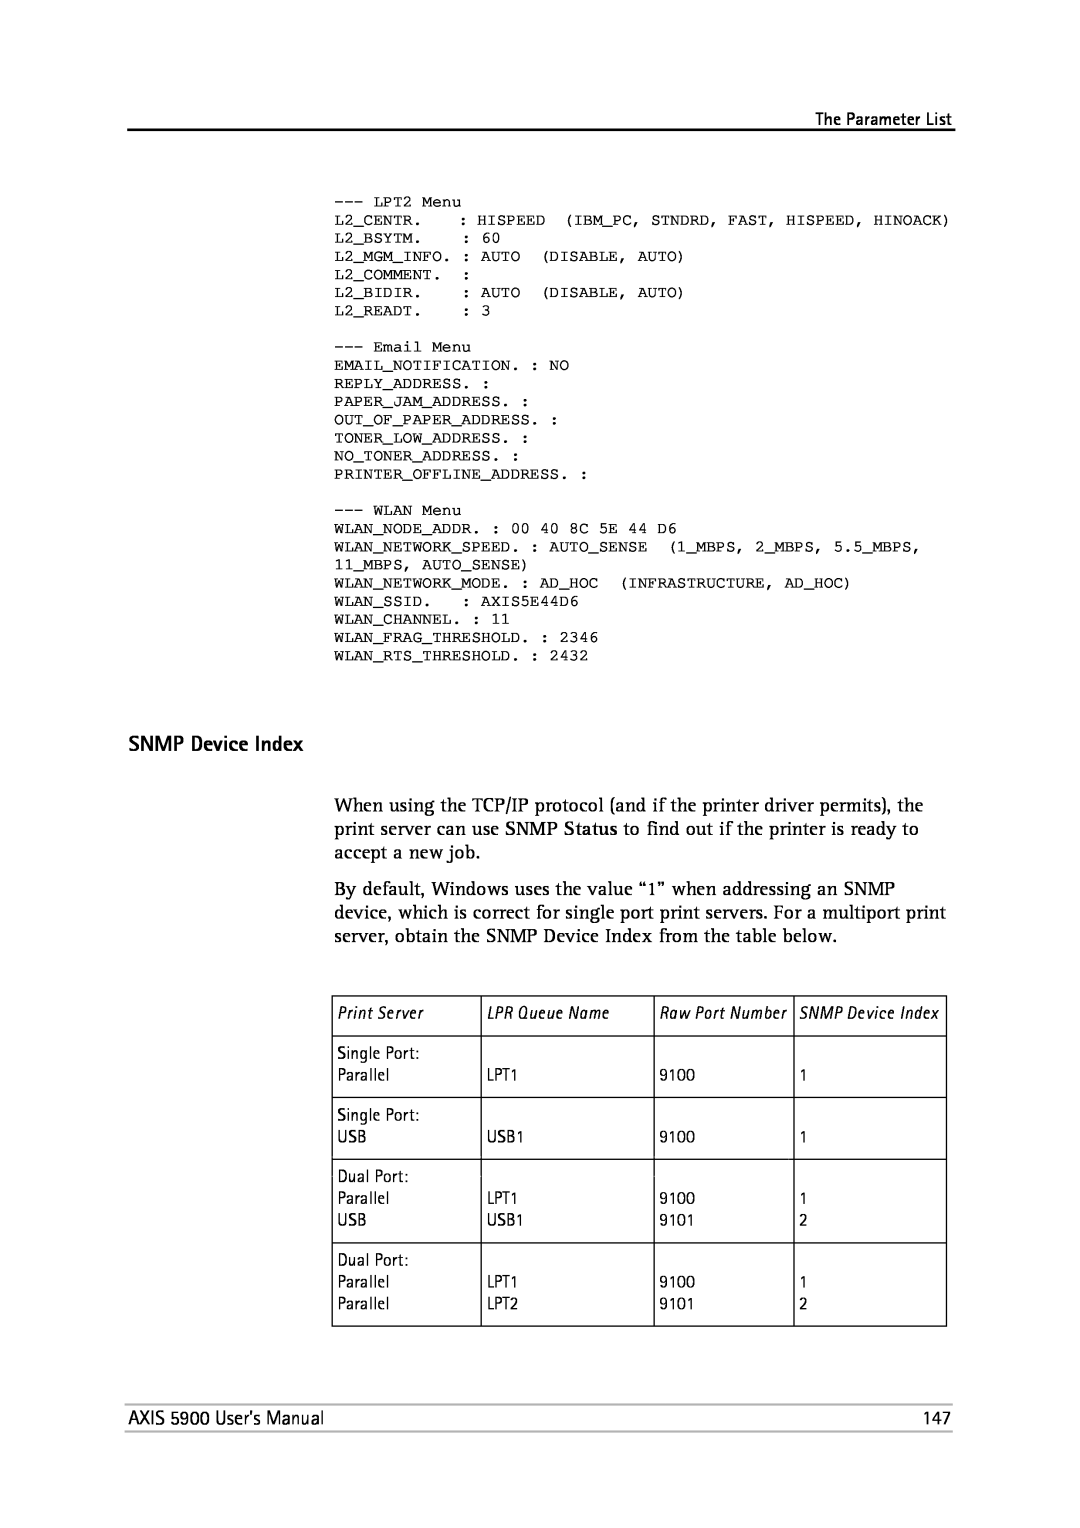 Philips 5900 user manual SNMP Device Index, Raw Port Number 